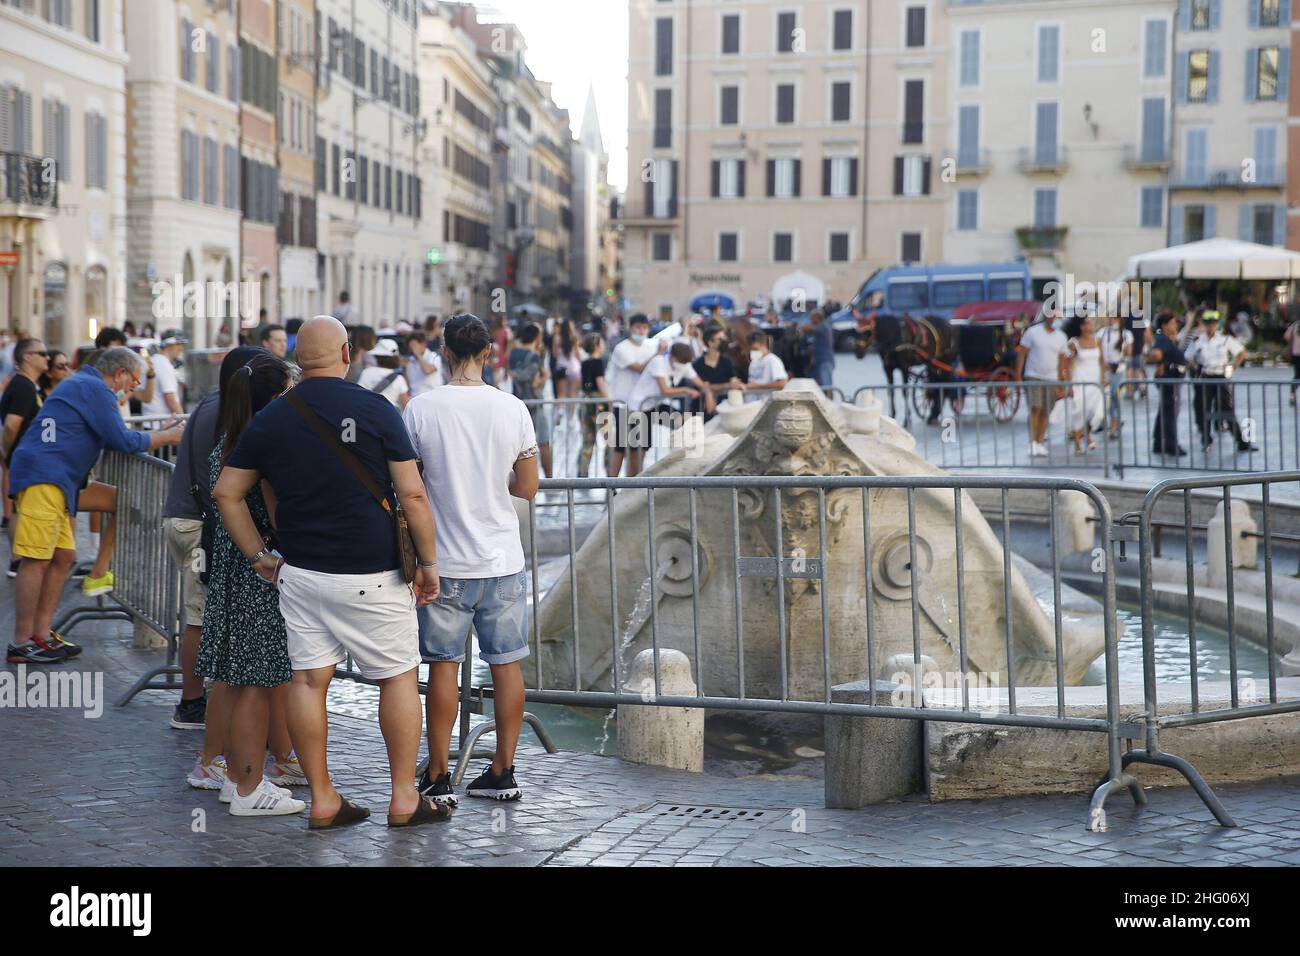 Cecilia Fabiano/ LaPresse July 02 , 2021 Roma (Italy) News Barcaccia Fountain protected by barriers during the UEFA EURO 2020 In the Pic : tourists around the fountain Stock Photo